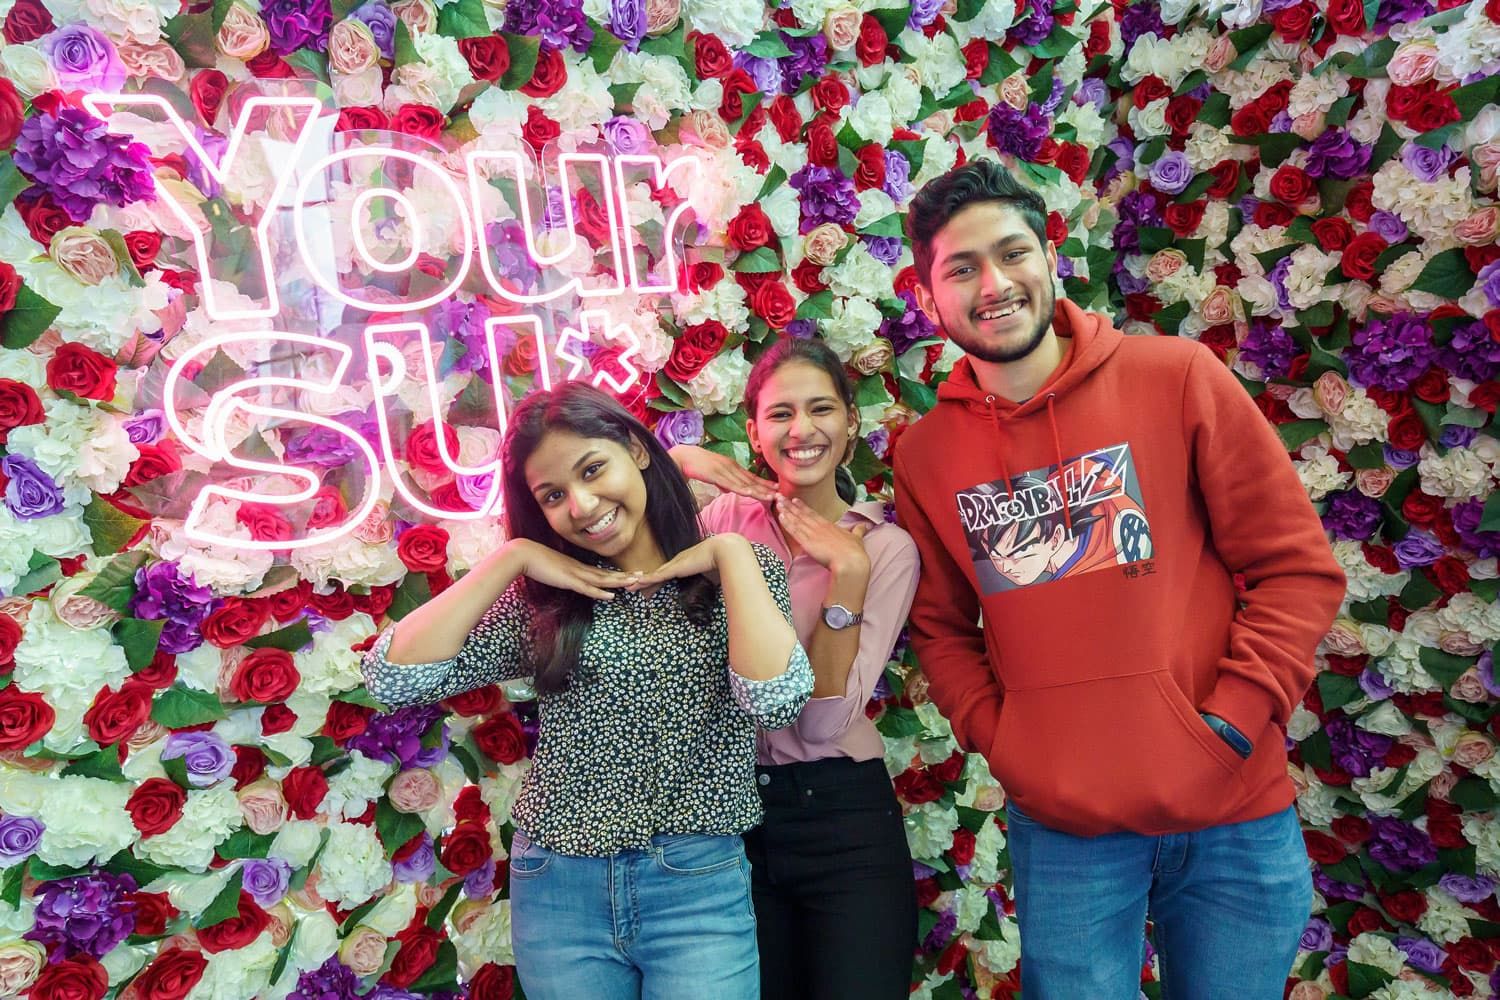 Students posing in front of a flower wall with the Students' Union sign lit up